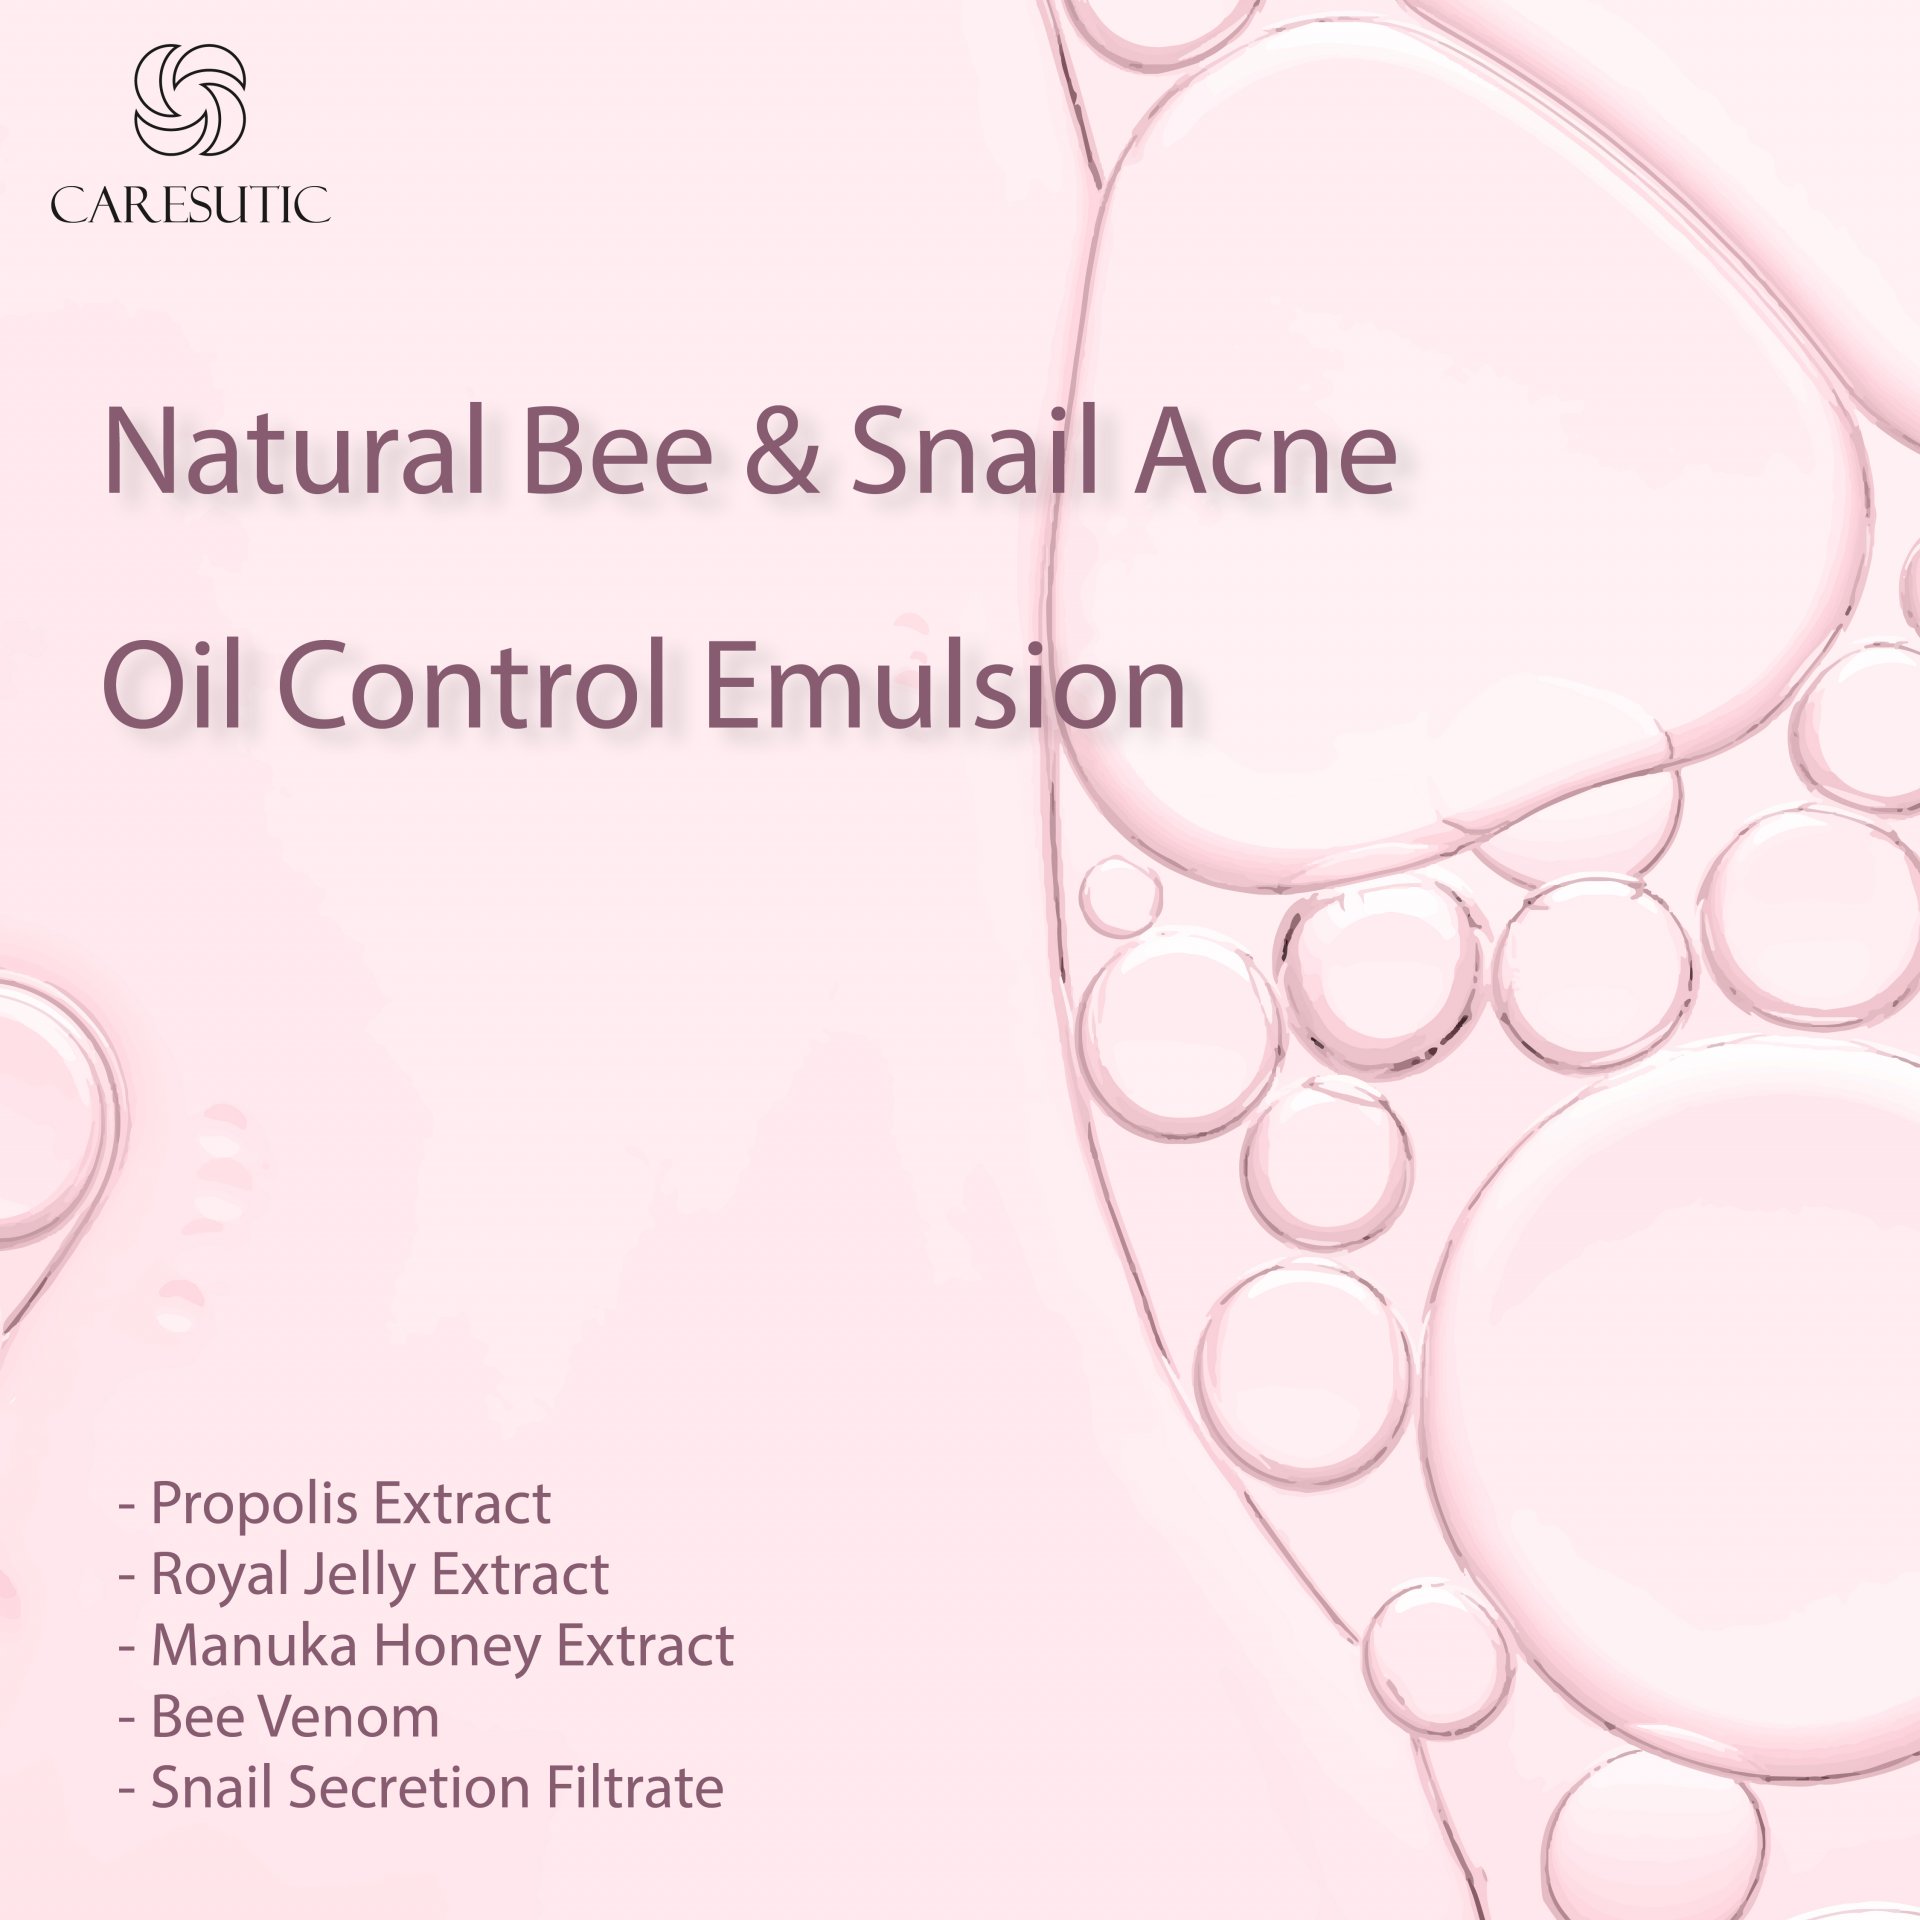 Natural Bee & Snail Acne Oil Control Emulsion